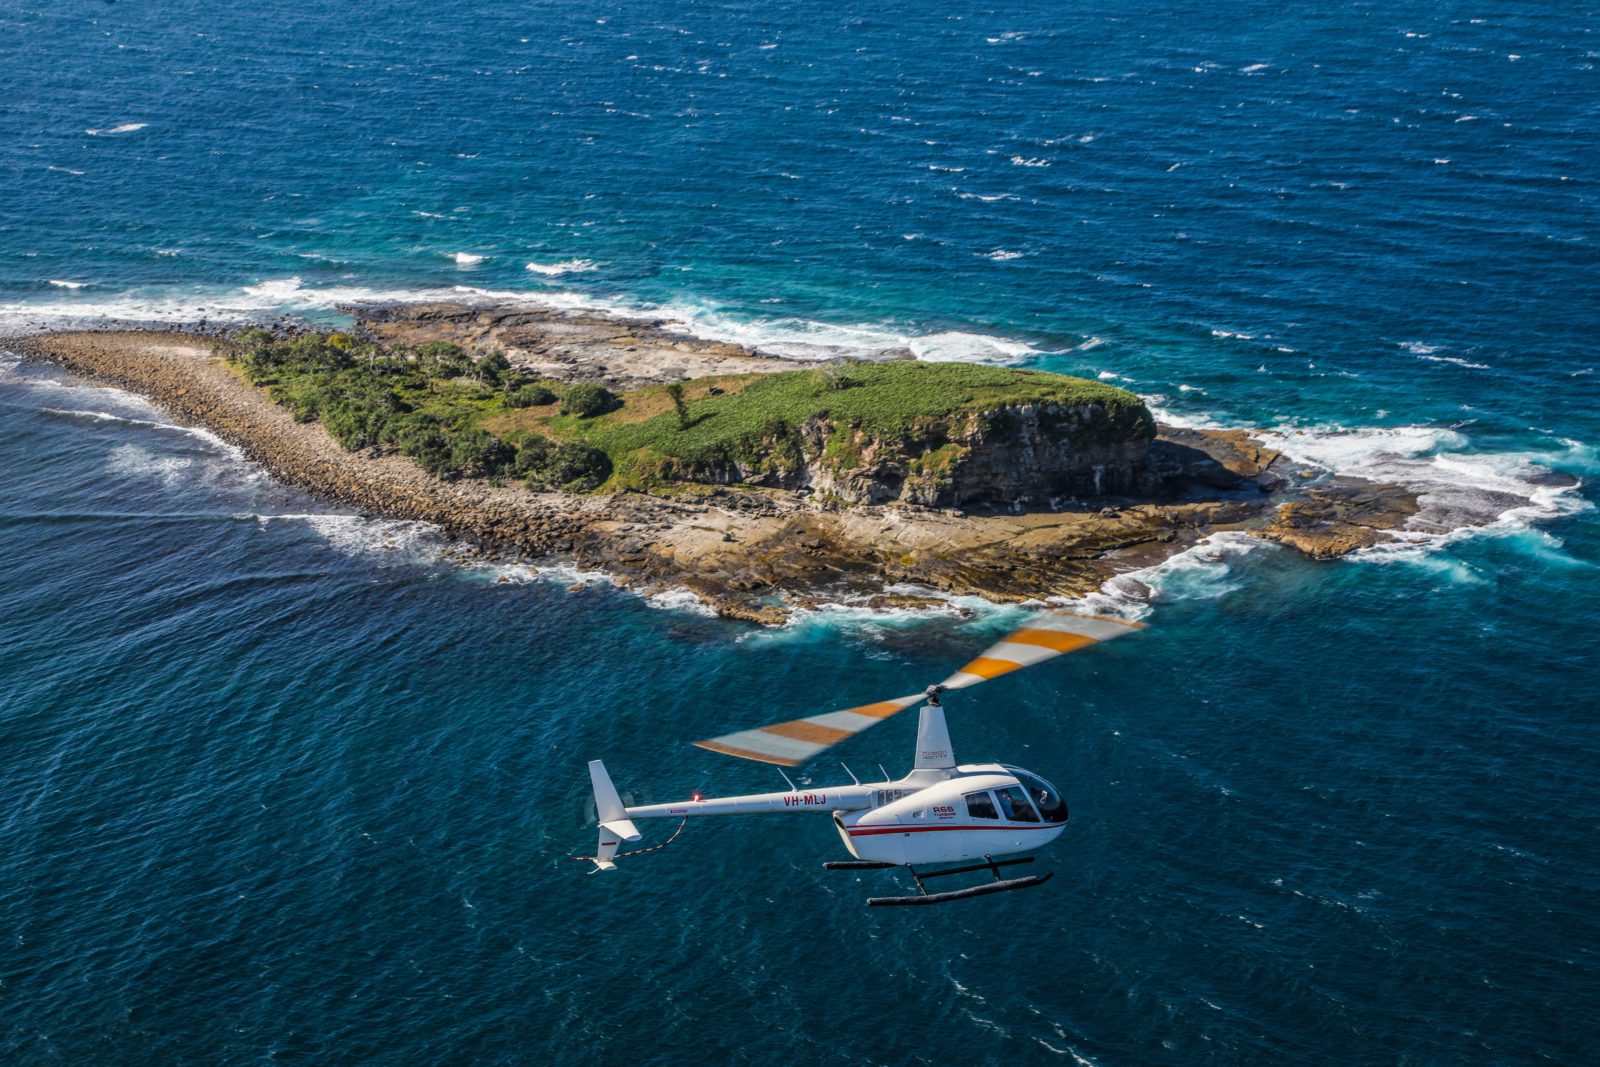 ake to the skies and discover the Sunshine Coast from a whole new perspective. In this 18 minute sce